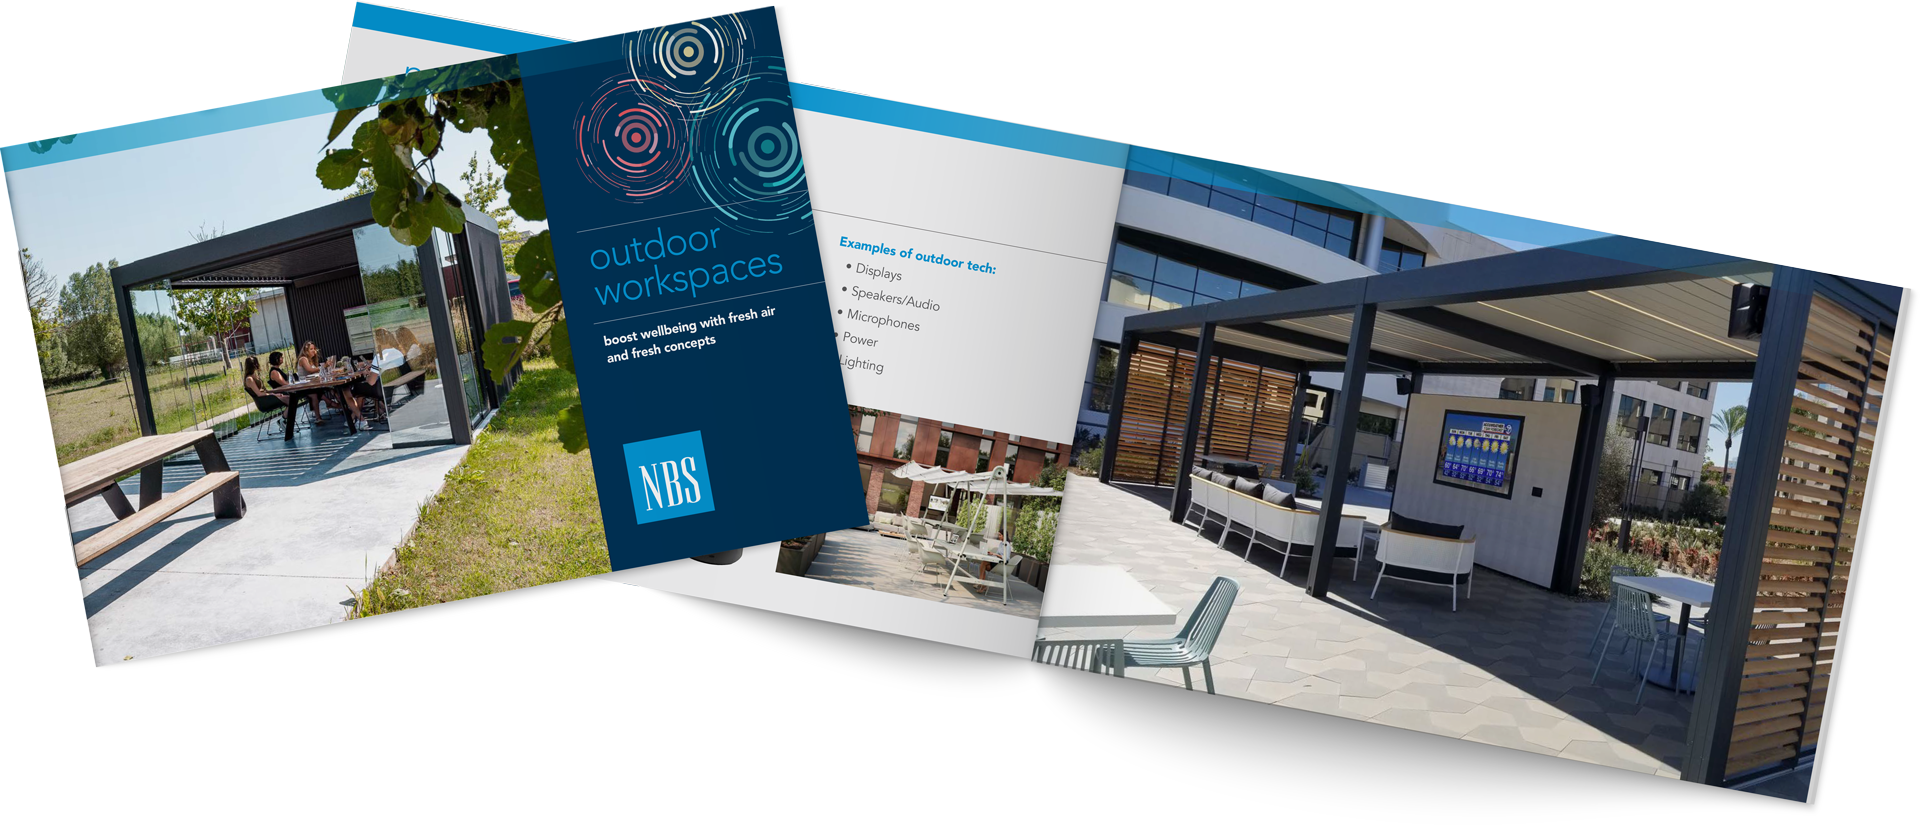 NBS Outdoor Workspaces Guide